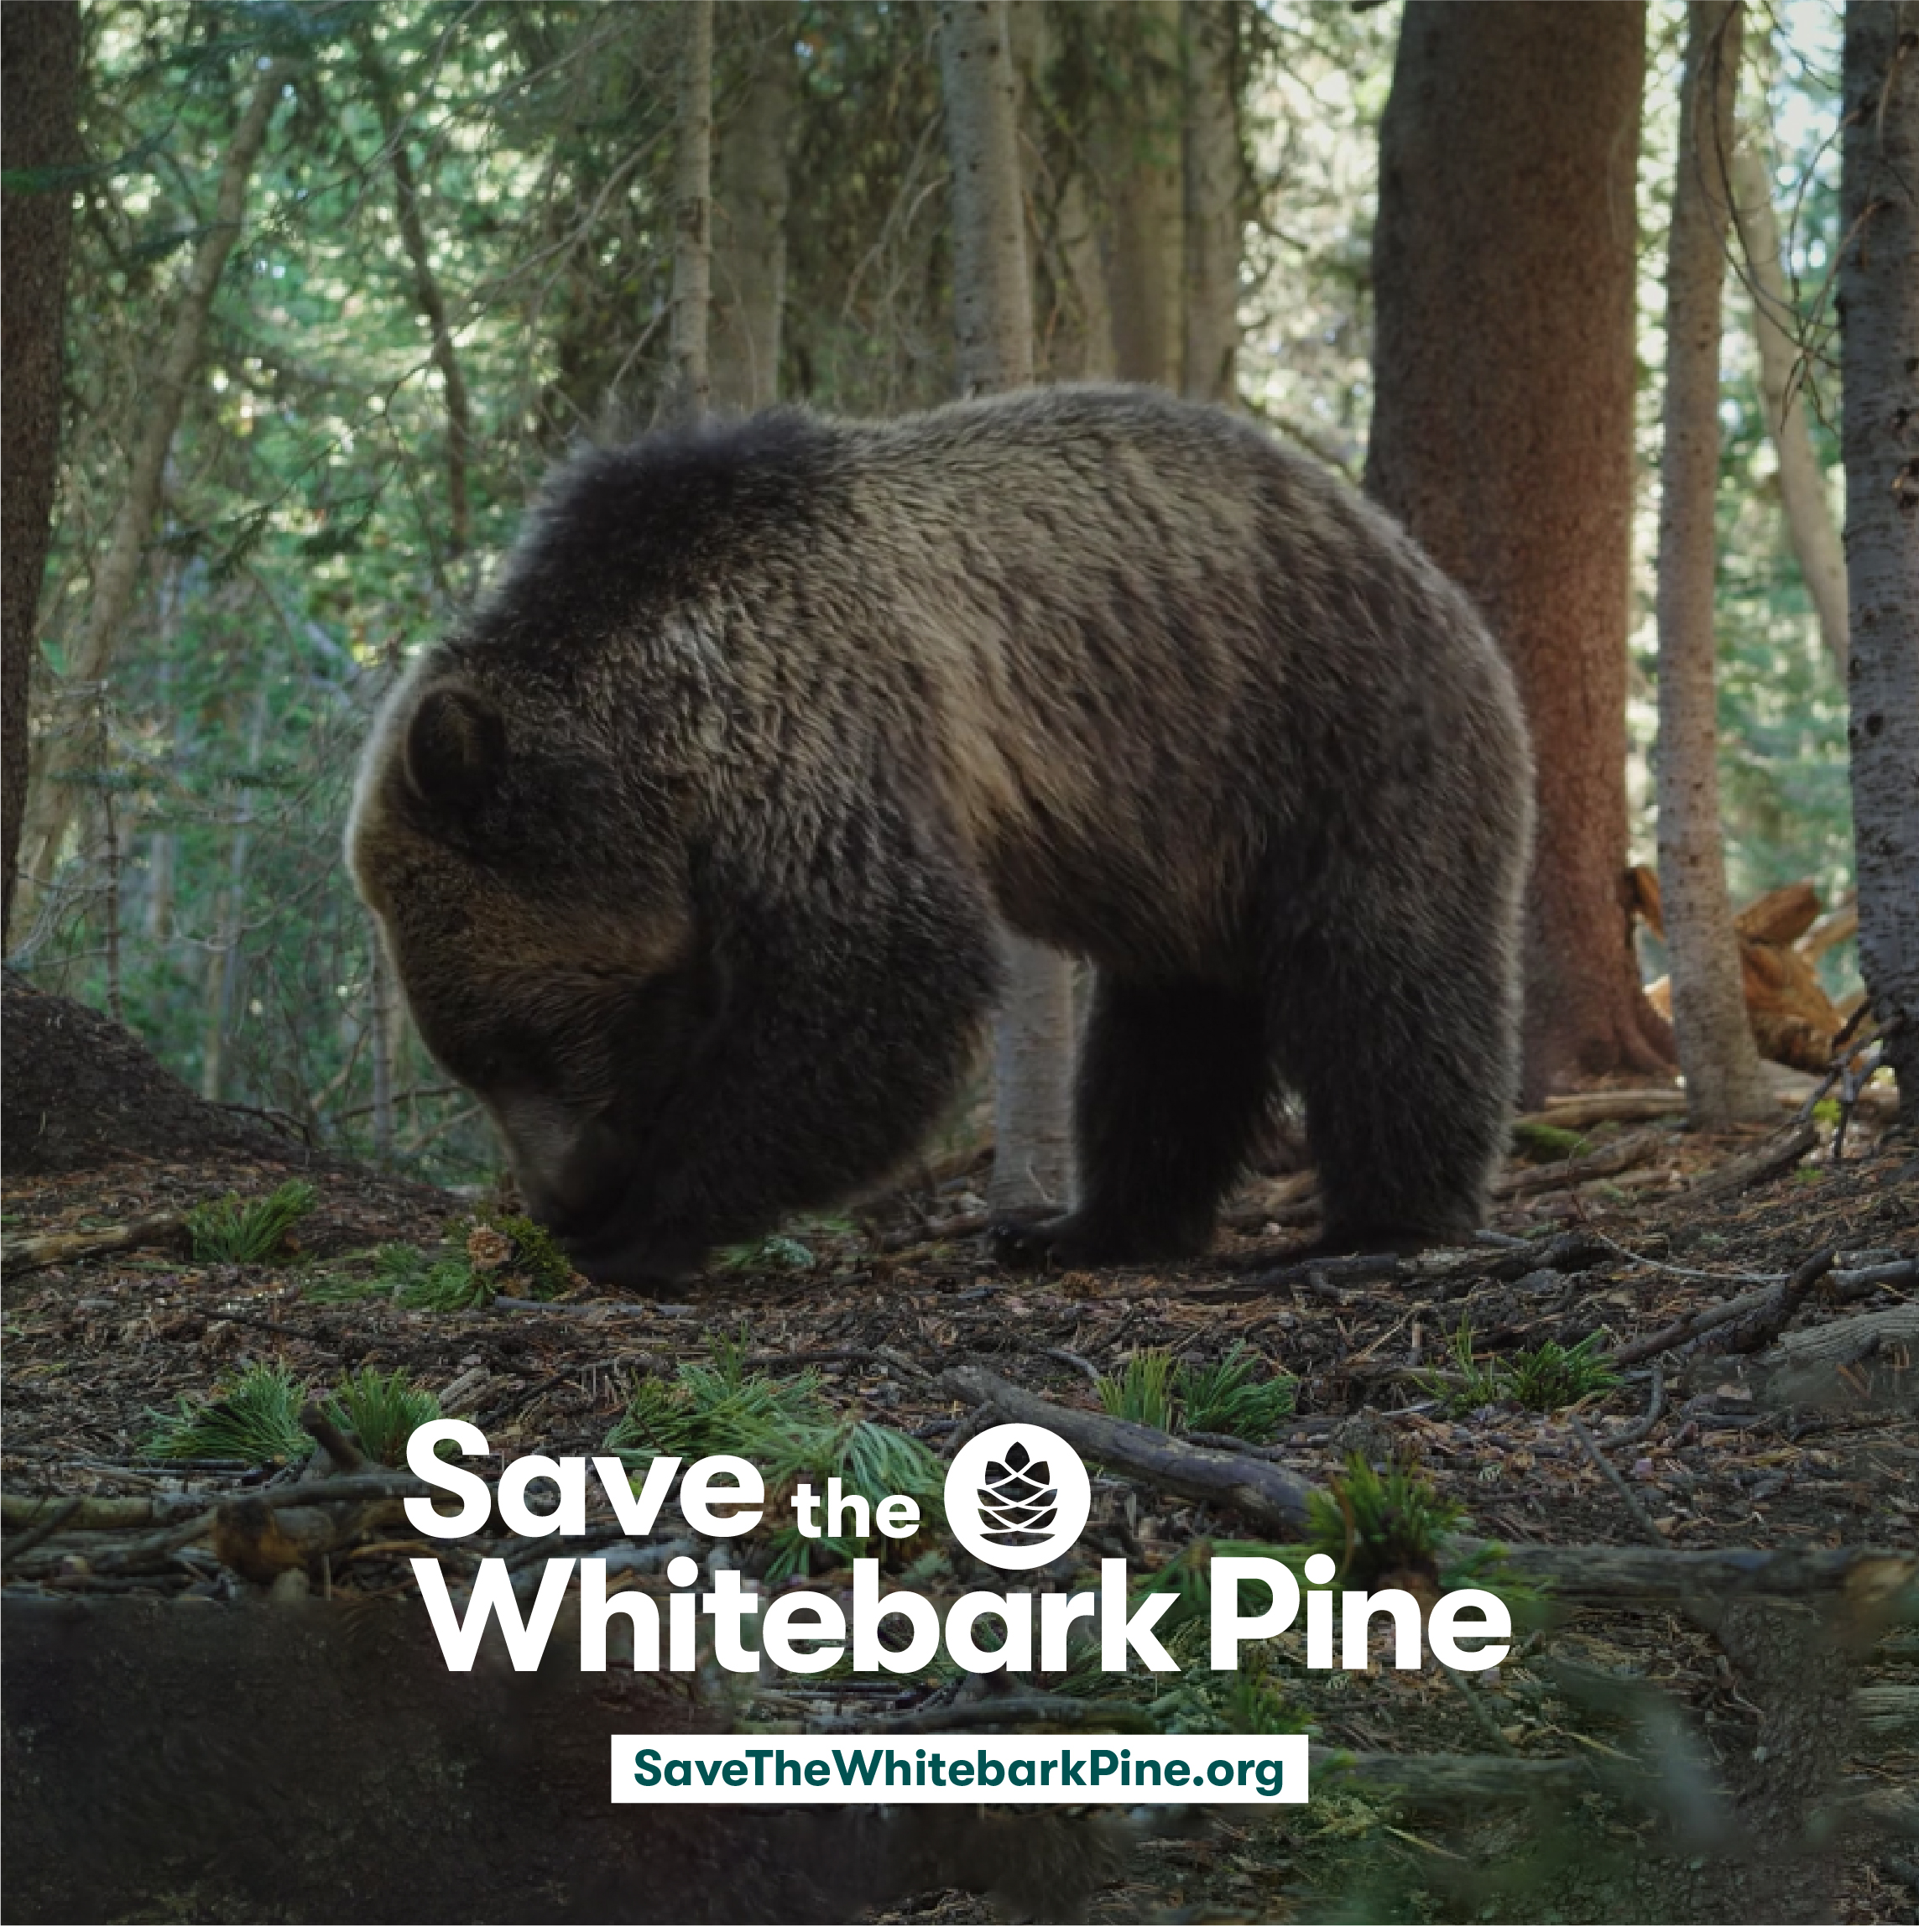 Picture of grizzly bear eating seeds in forest with text "Save the Whitebark Pine"